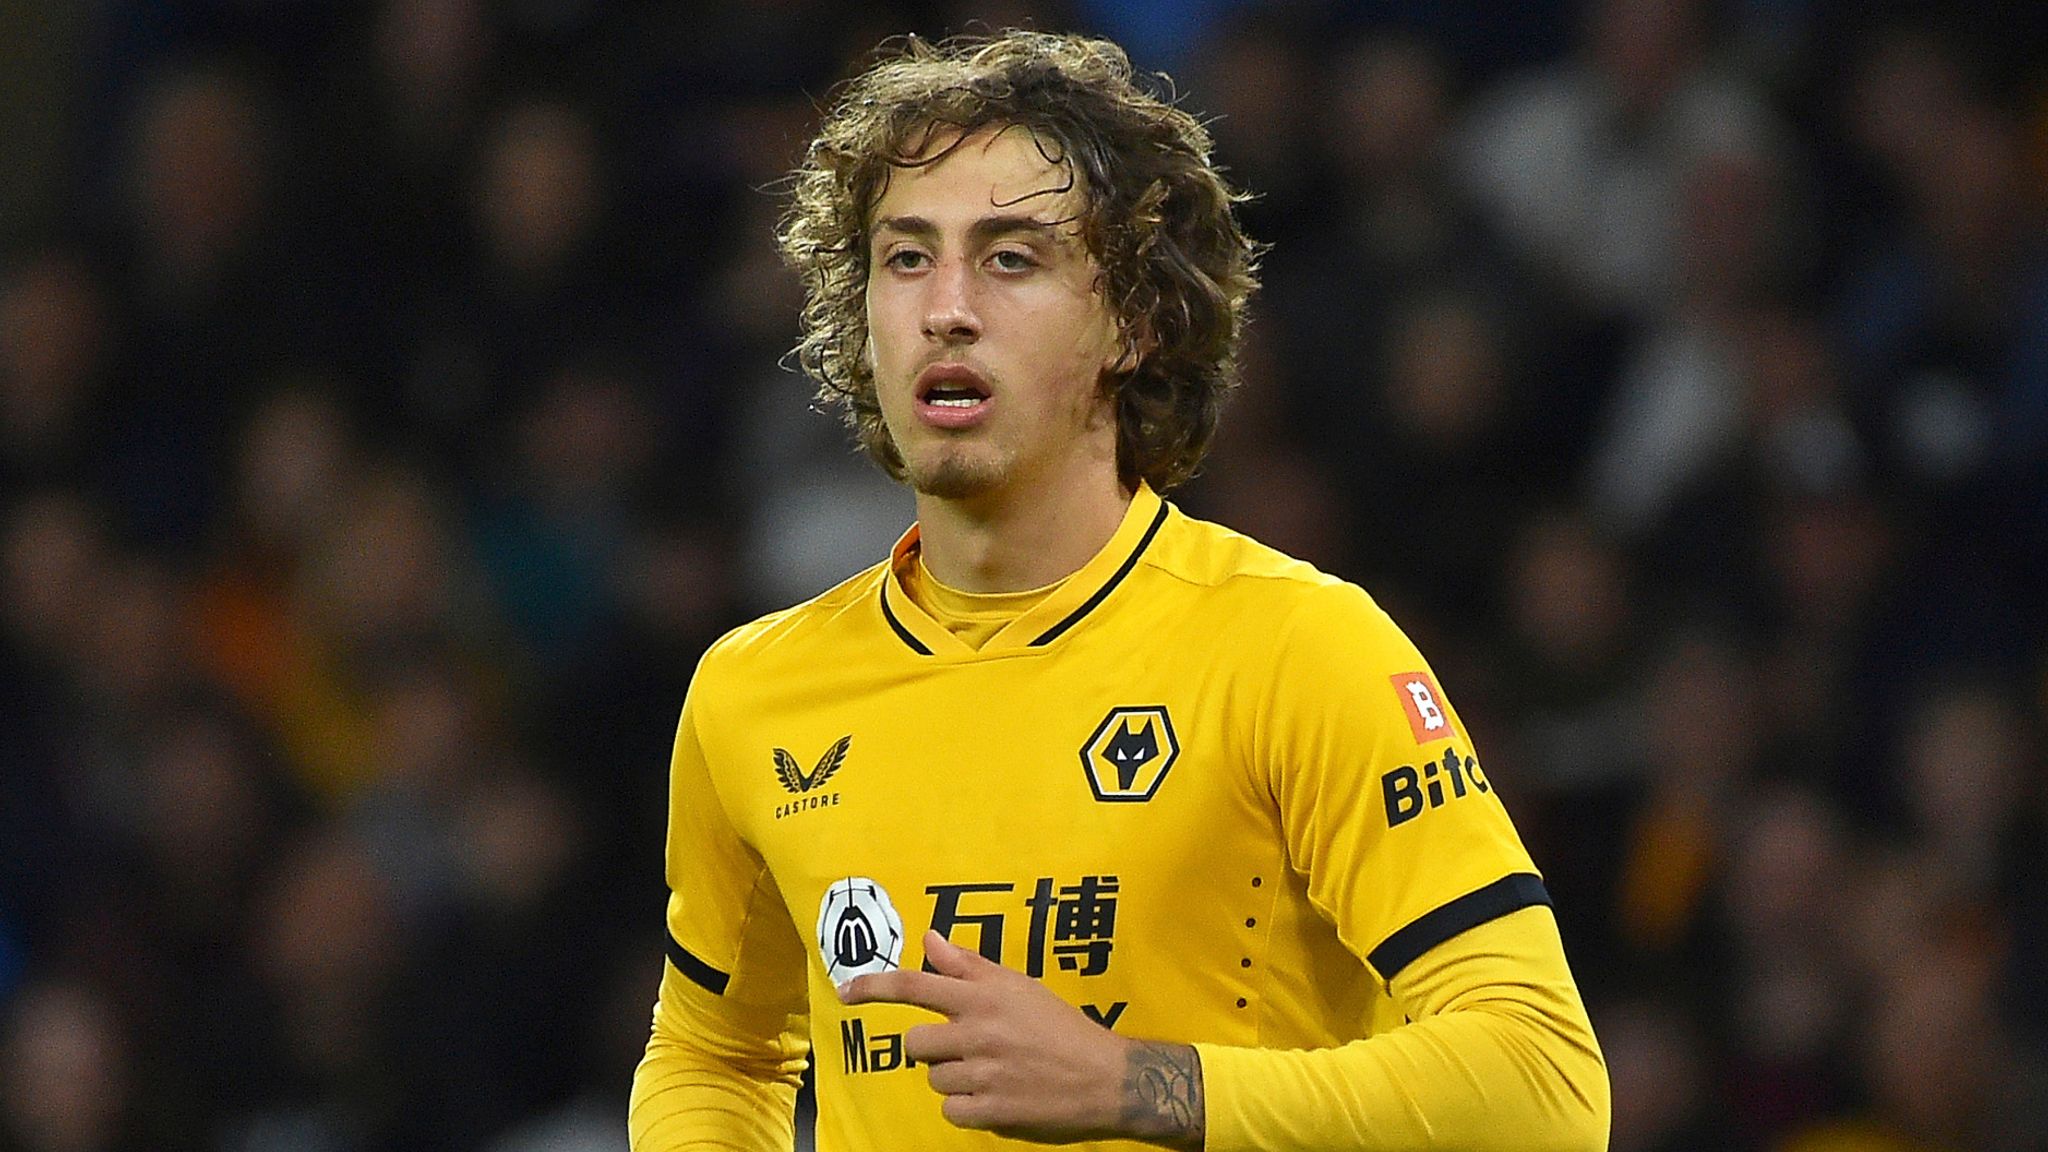 Fabio Silva on loan to Anderlecht: Wolves' record signing is still young  but his time at Molineux has not been easy | Football News | Sky Sports